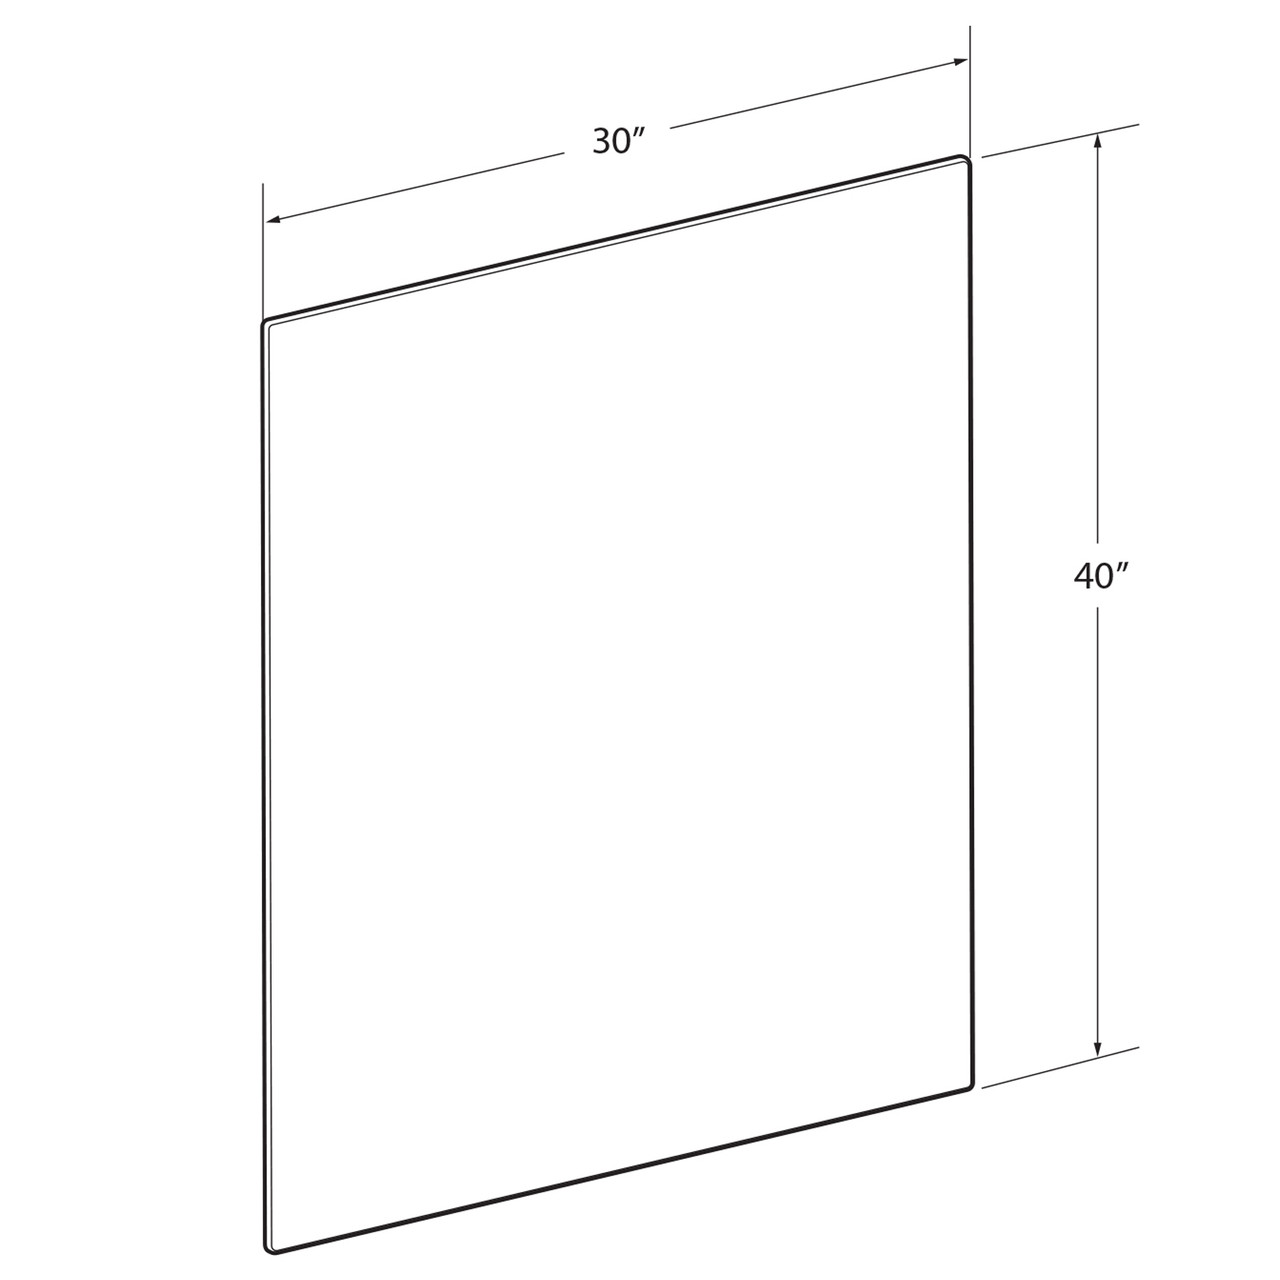 Clear Plastic Sheets 3 Pack